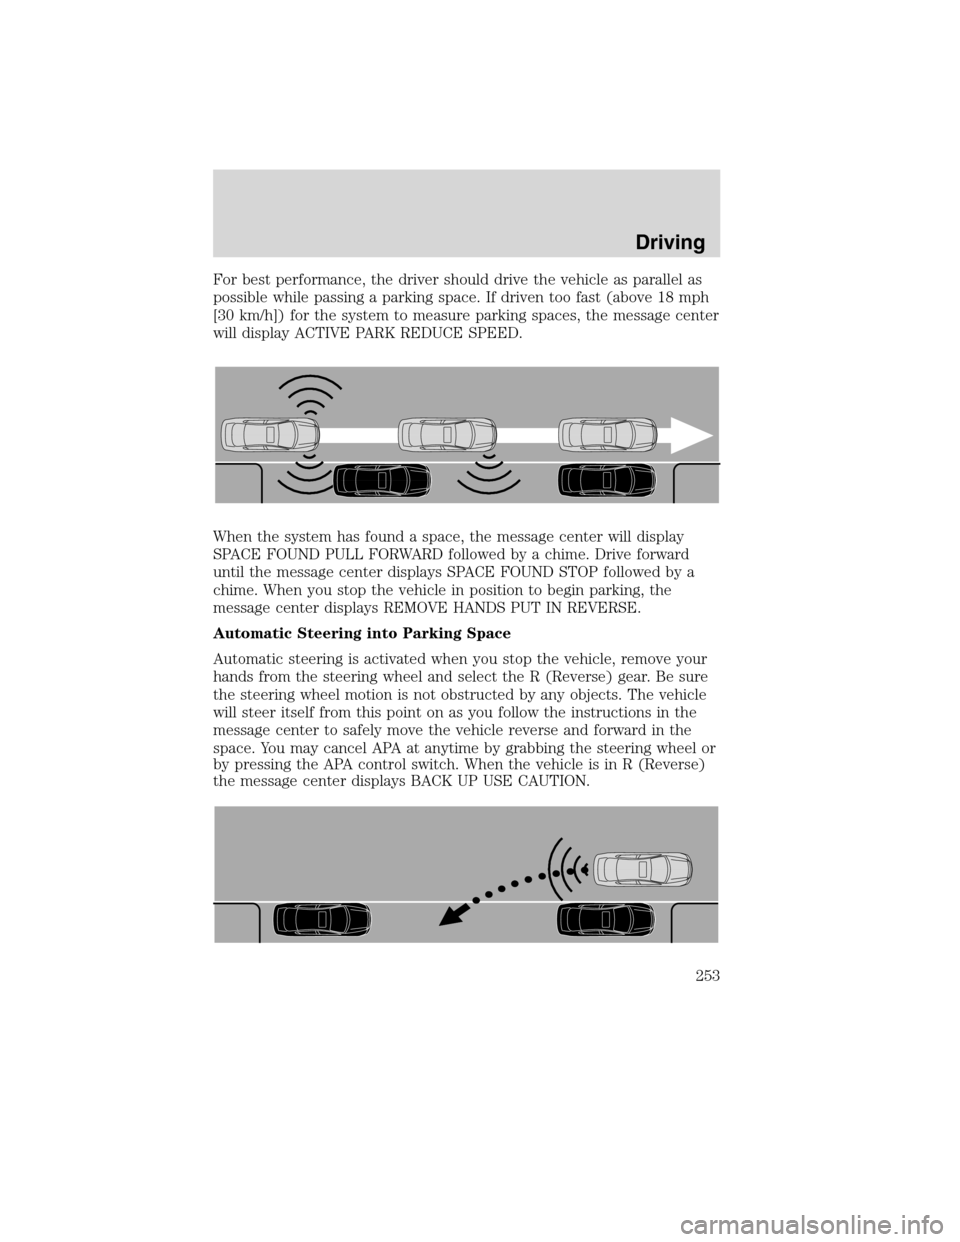 LINCOLN MKS 2010 Owners Manual For best performance, the driver should drive the vehicle as parallel as
possible while passing a parking space. If driven too fast (above 18 mph
[30 km/h]) for the system to measure parking spaces, t